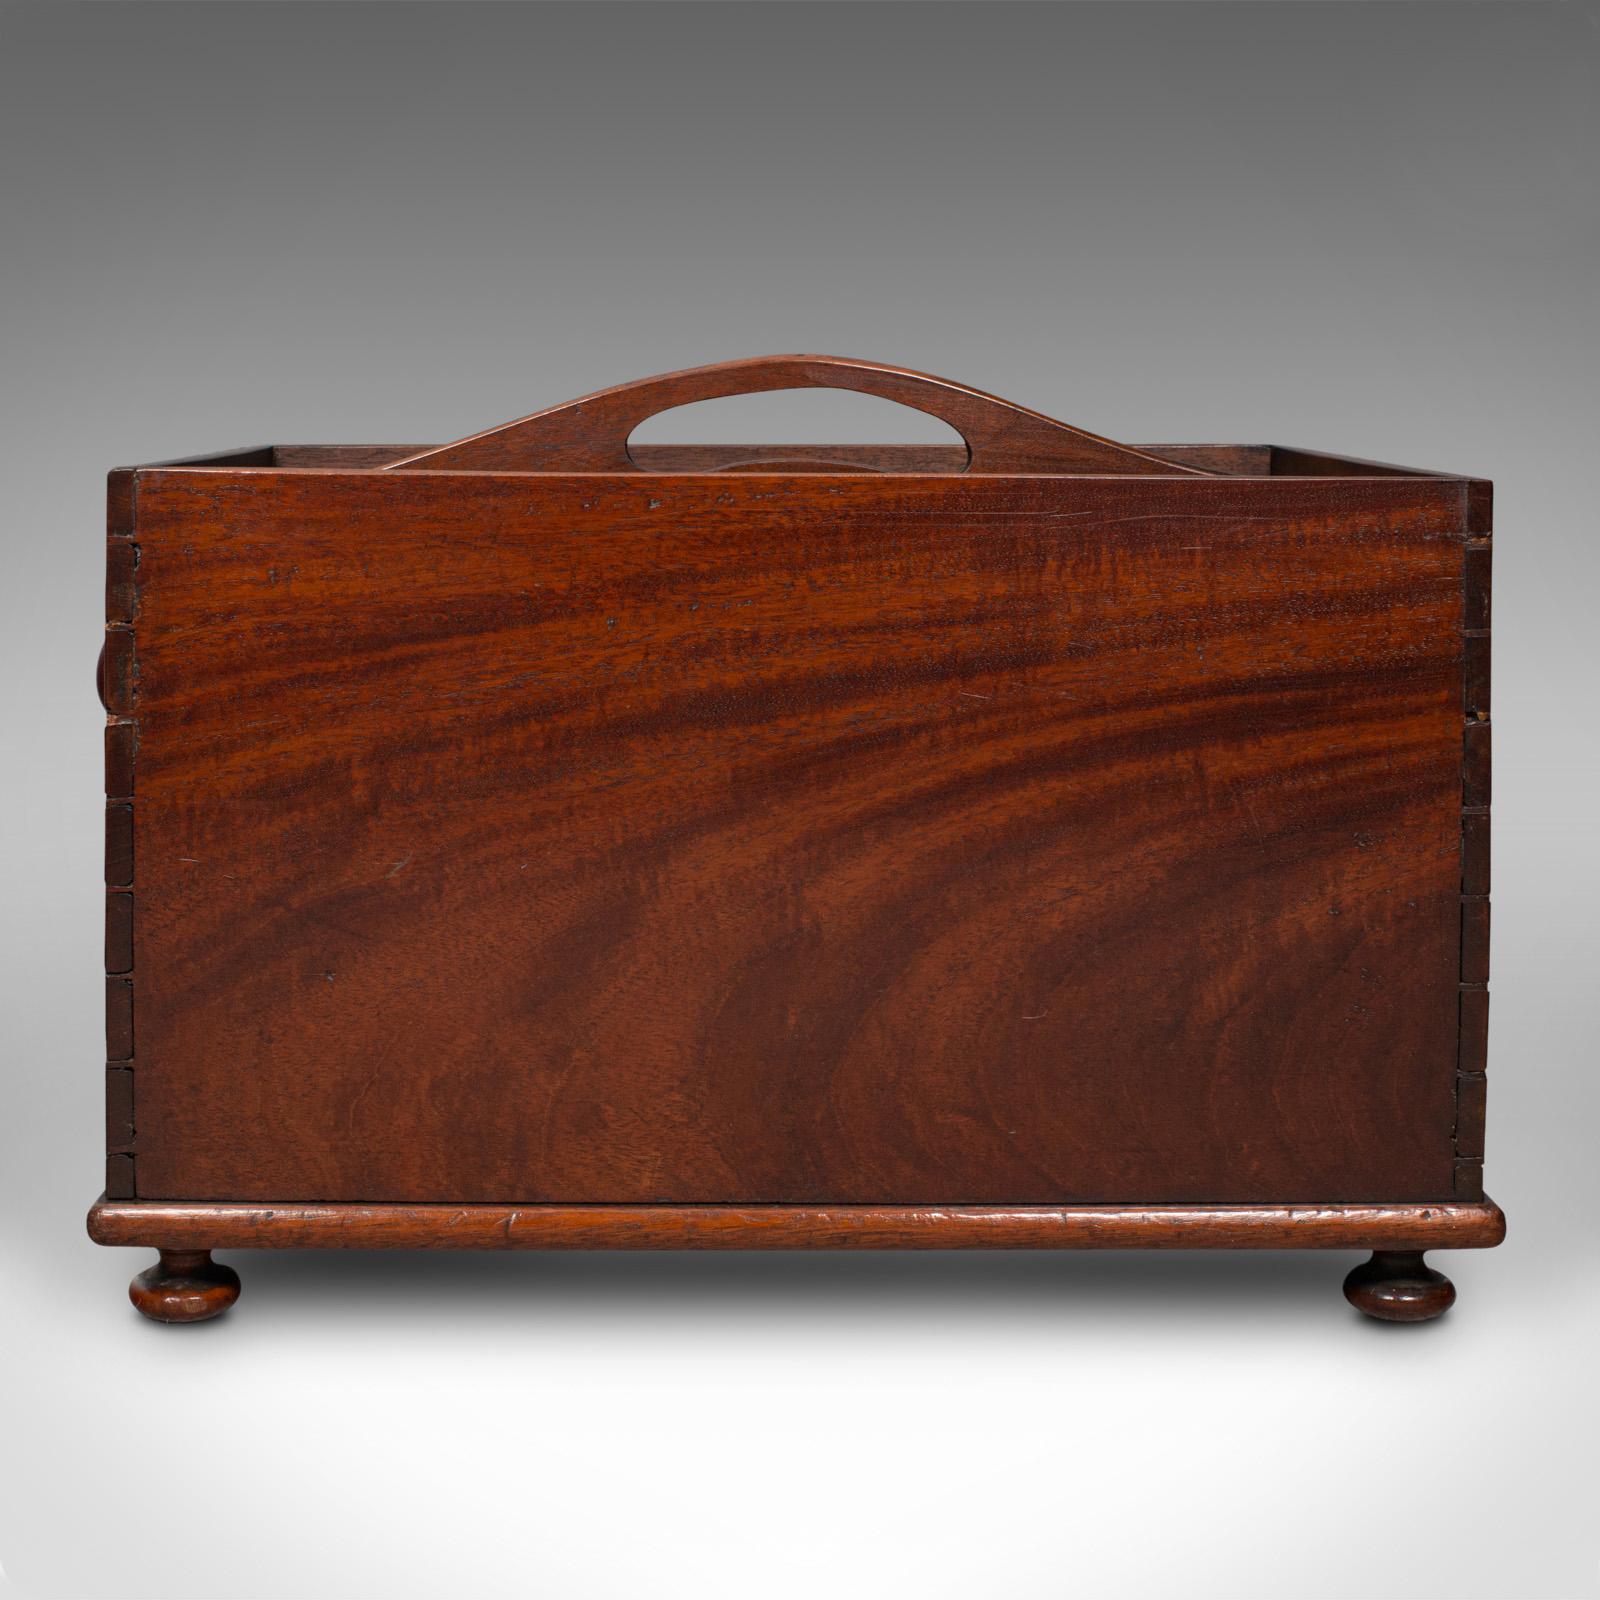 This is an antique butler's silver carry tray. An English, mahogany newspaper rack or work box, dating to the early Victorian period, circa 1850.

Attractive carry with a pair of generous compartments
Displaying a desirable aged patina and in